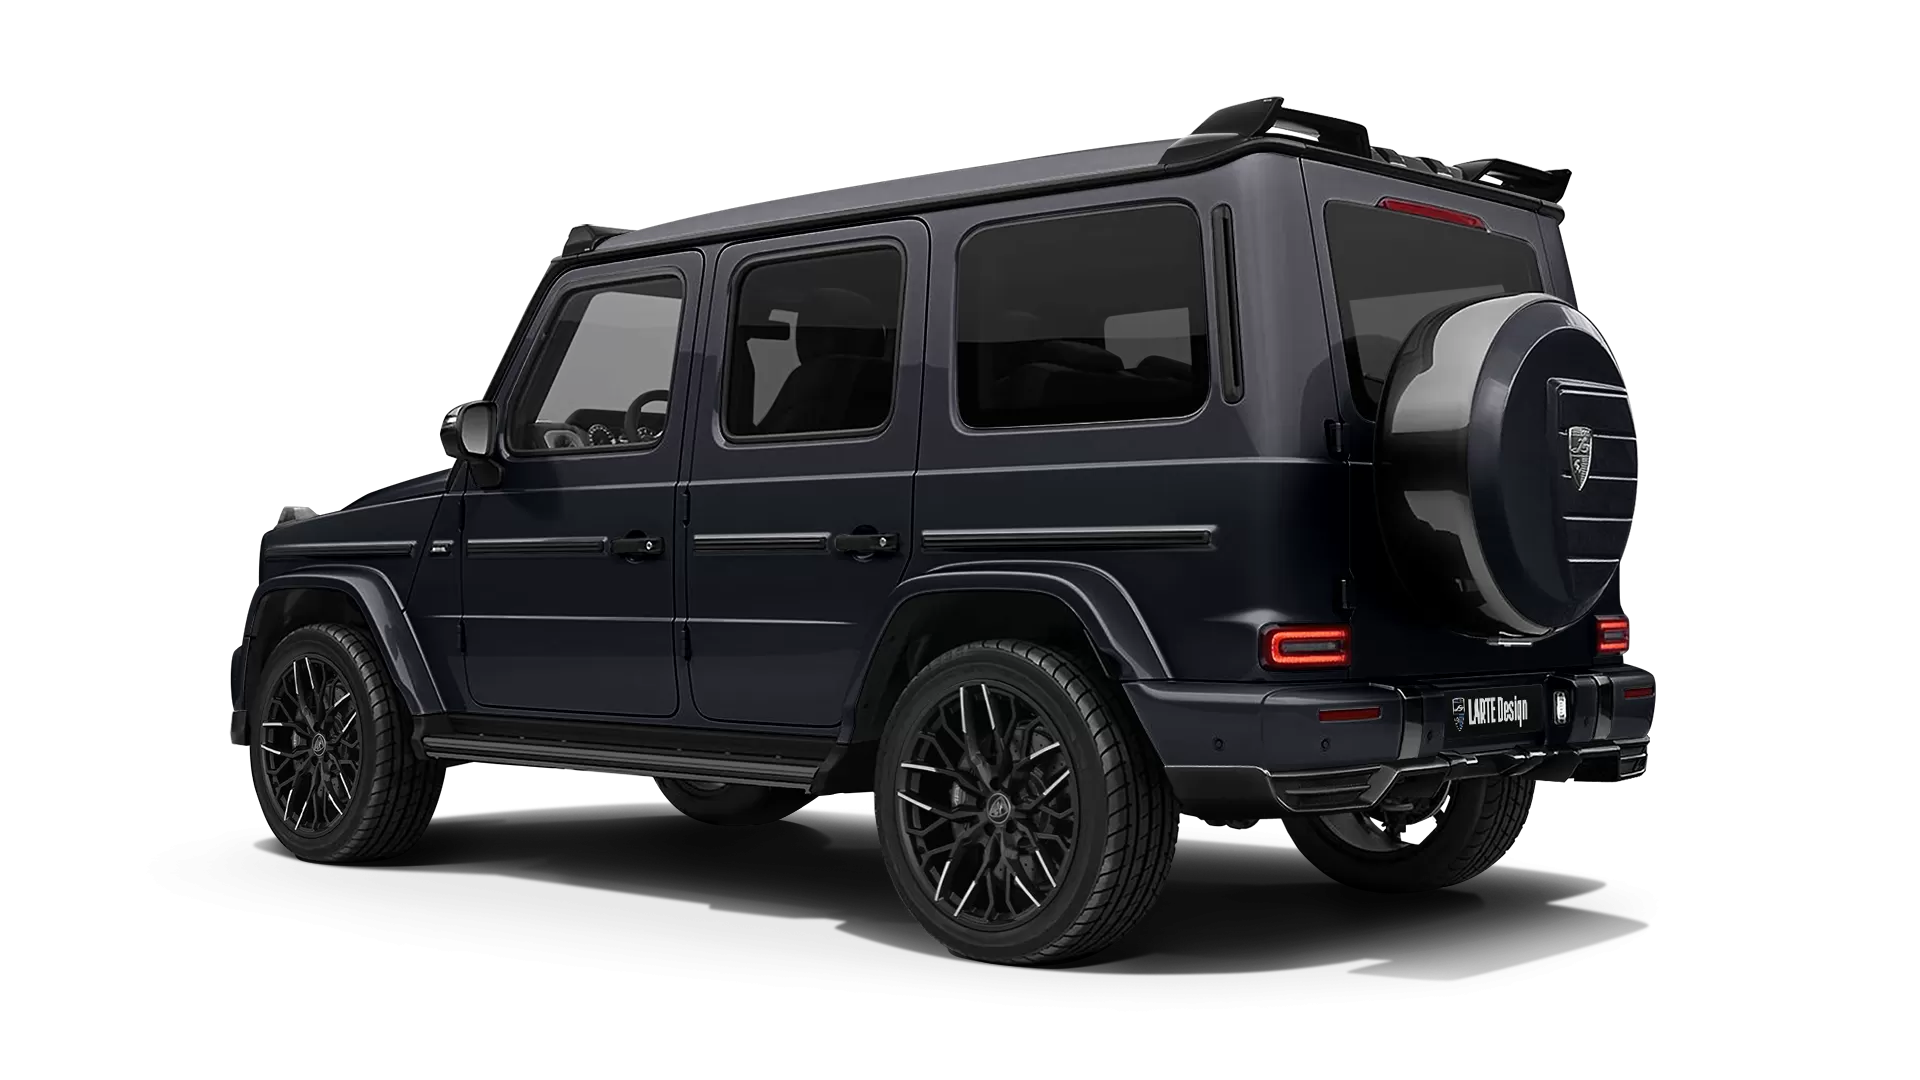 Mercedes G class W463 with painted body kit: rear view shown in Obsidian Black